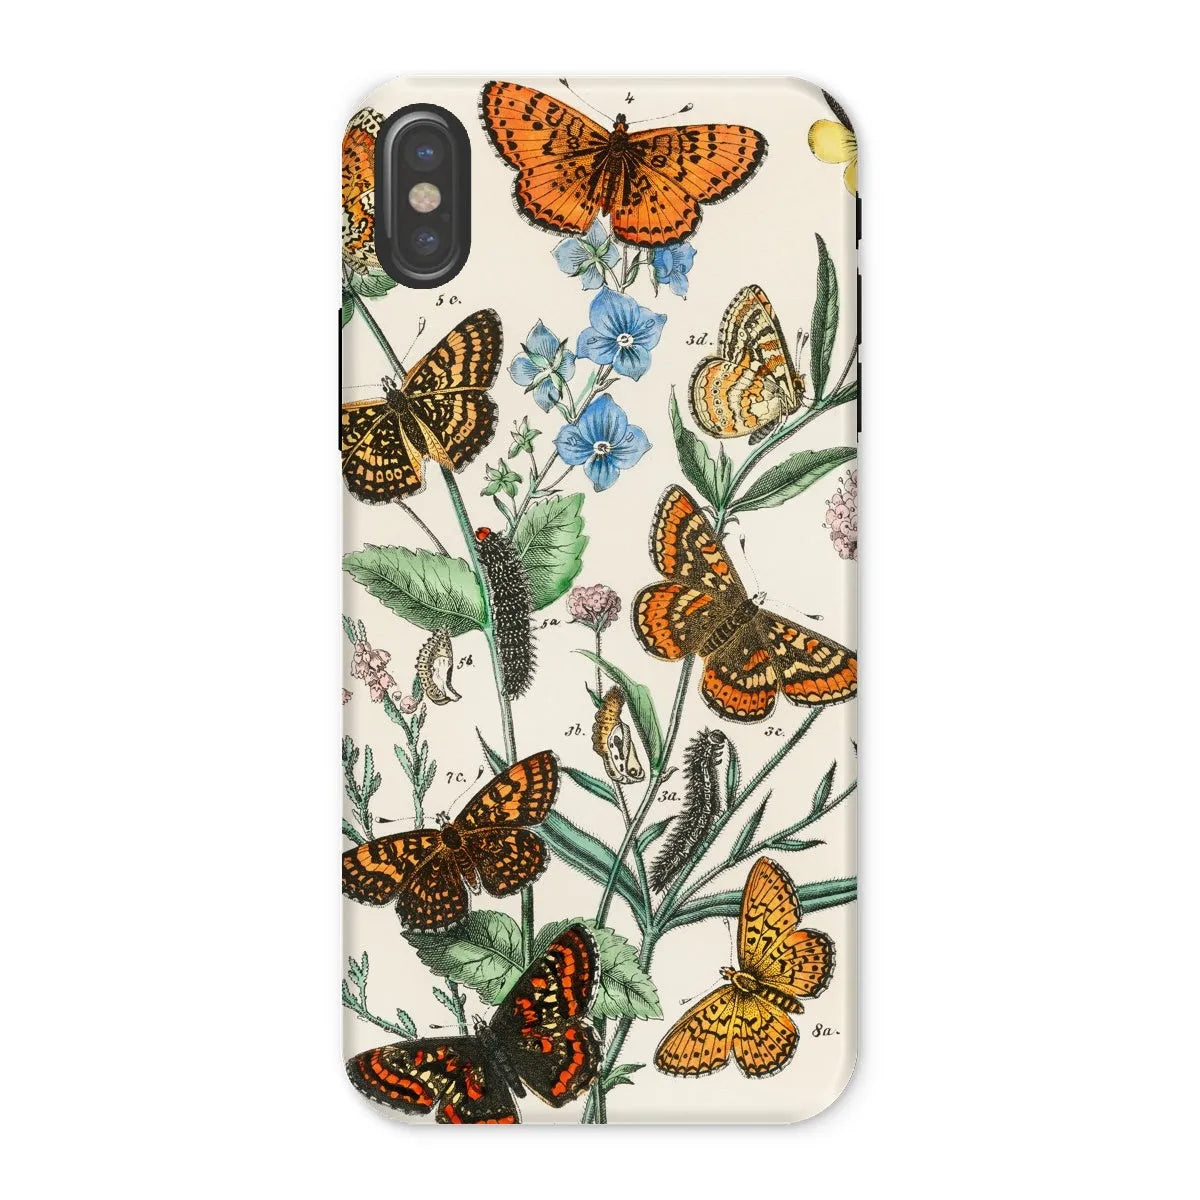 This Butterfly Aesthetic Art Phone Case - William Forsell Kirby - Iphone x / Matte - Mobile Phone Cases - Aesthetic Art